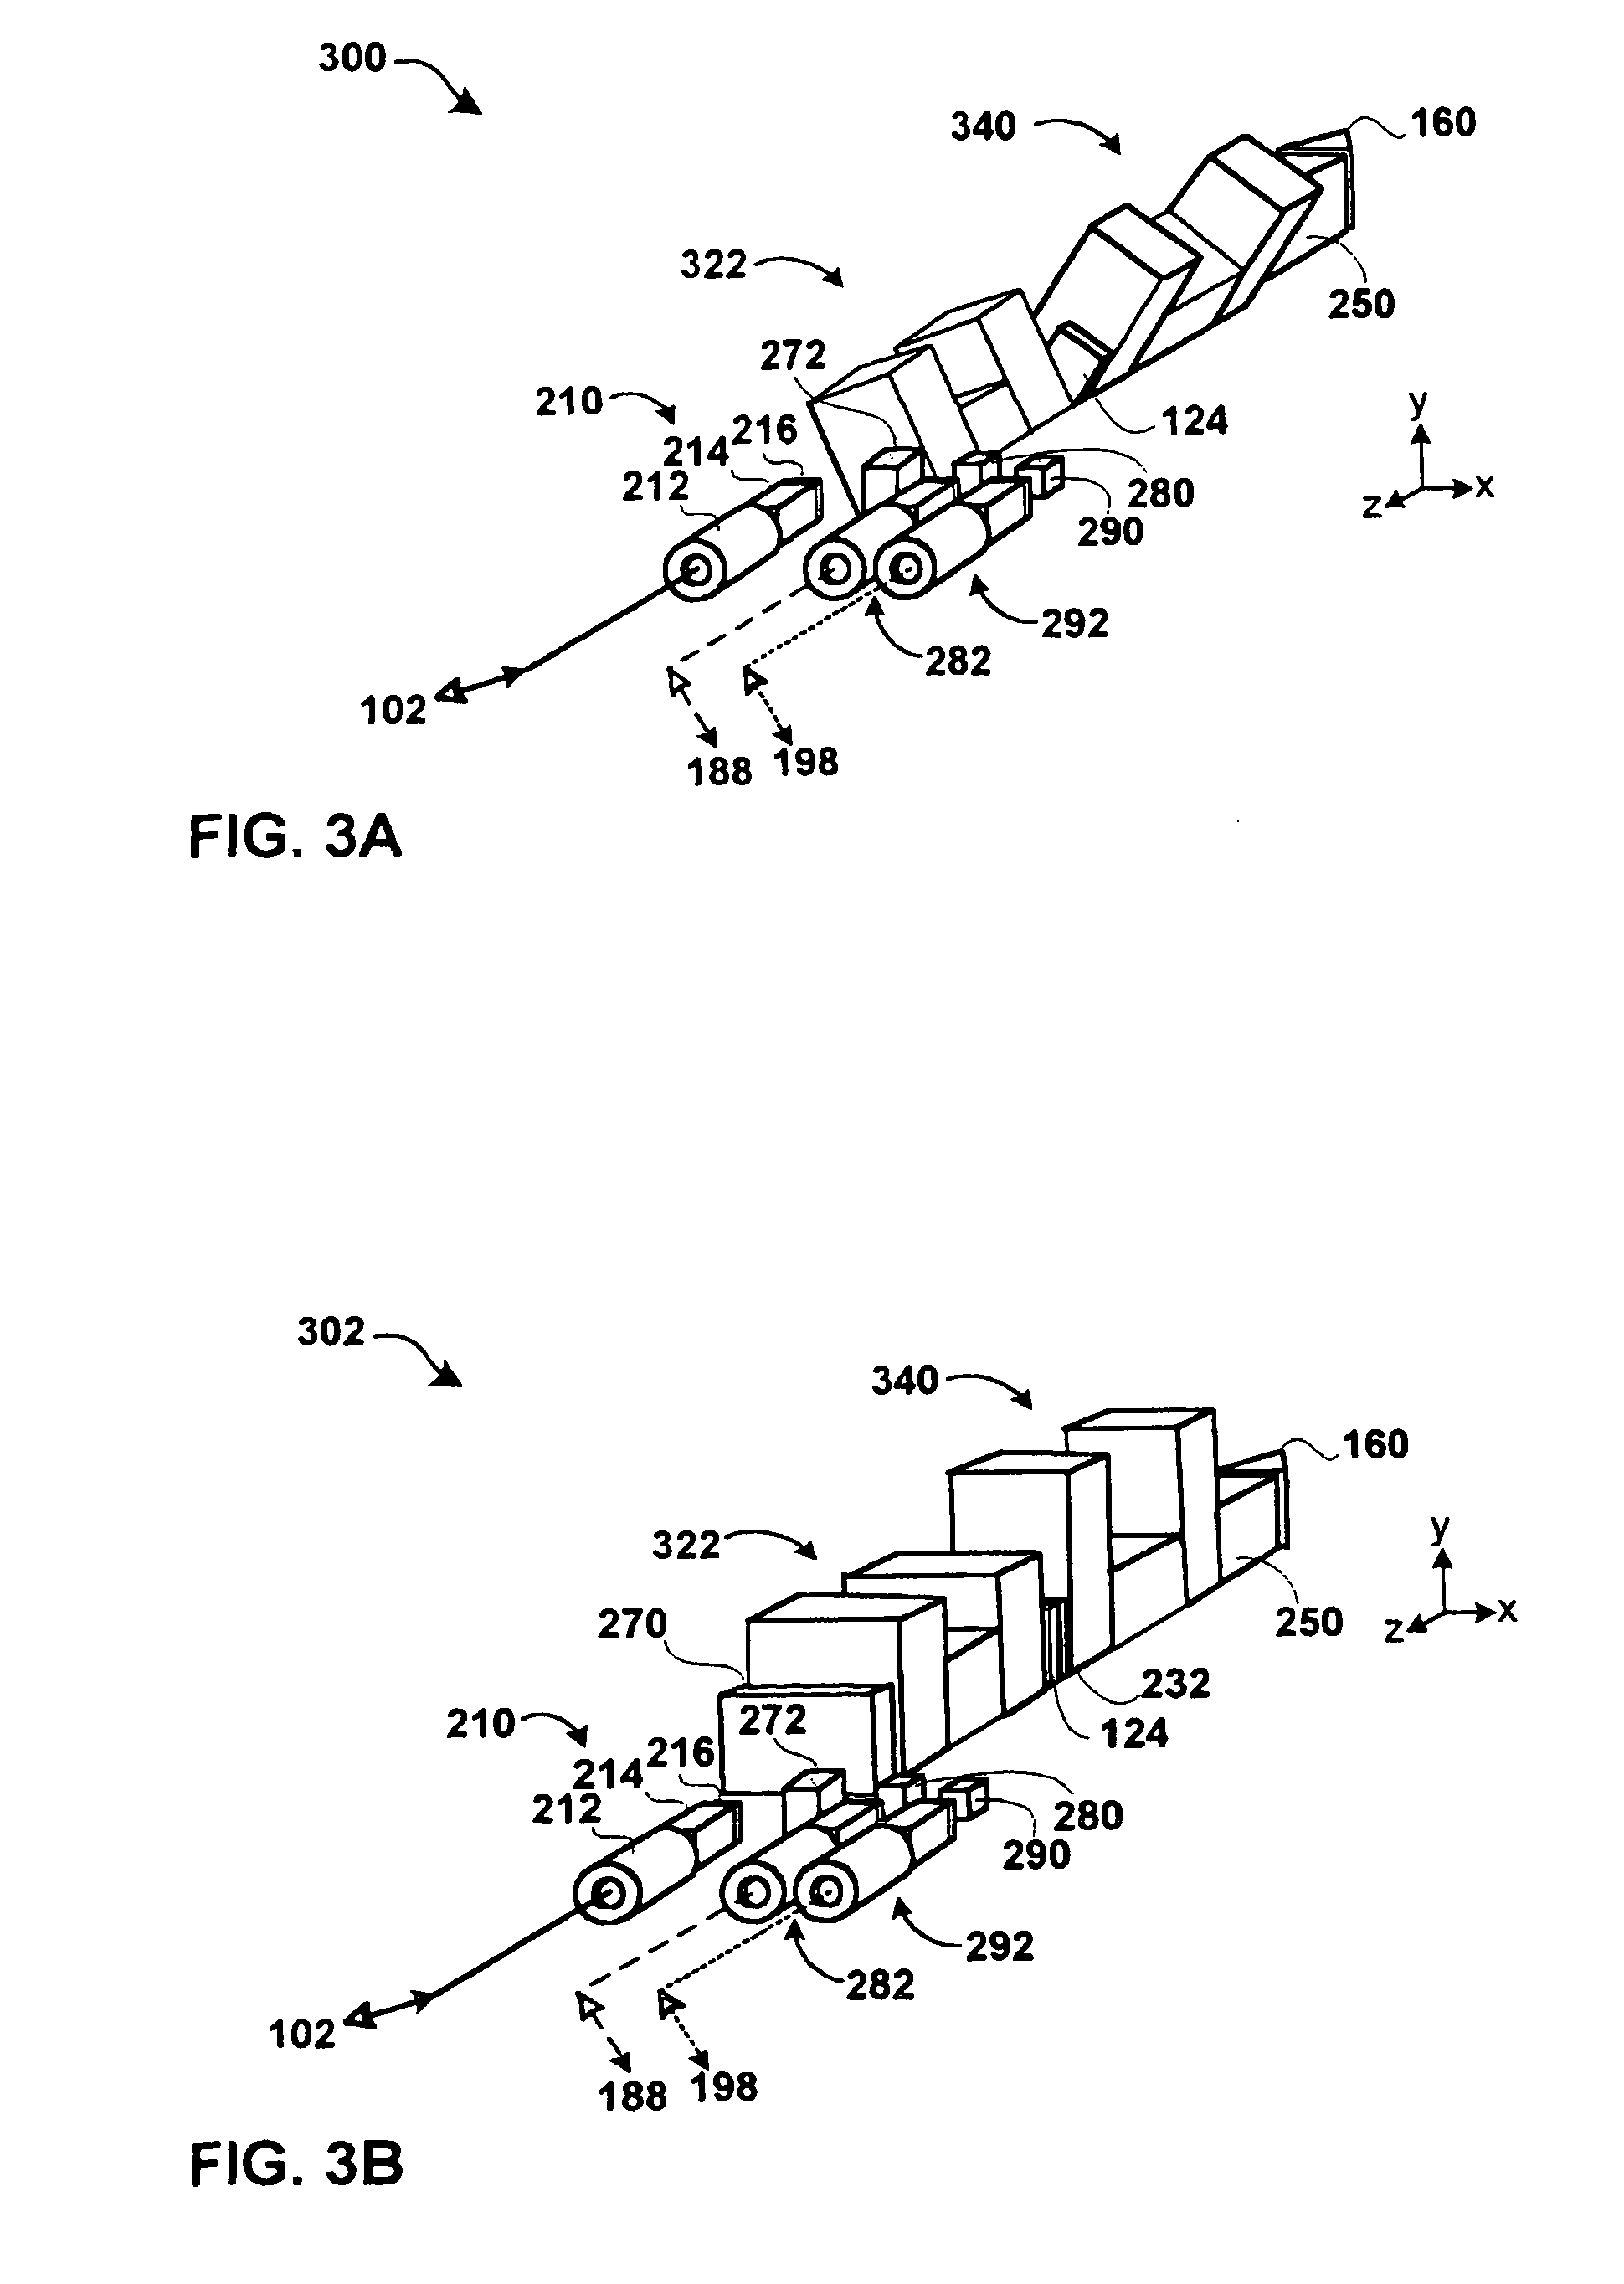 Optical interleaver and filter cell design with enhanced clear aperture